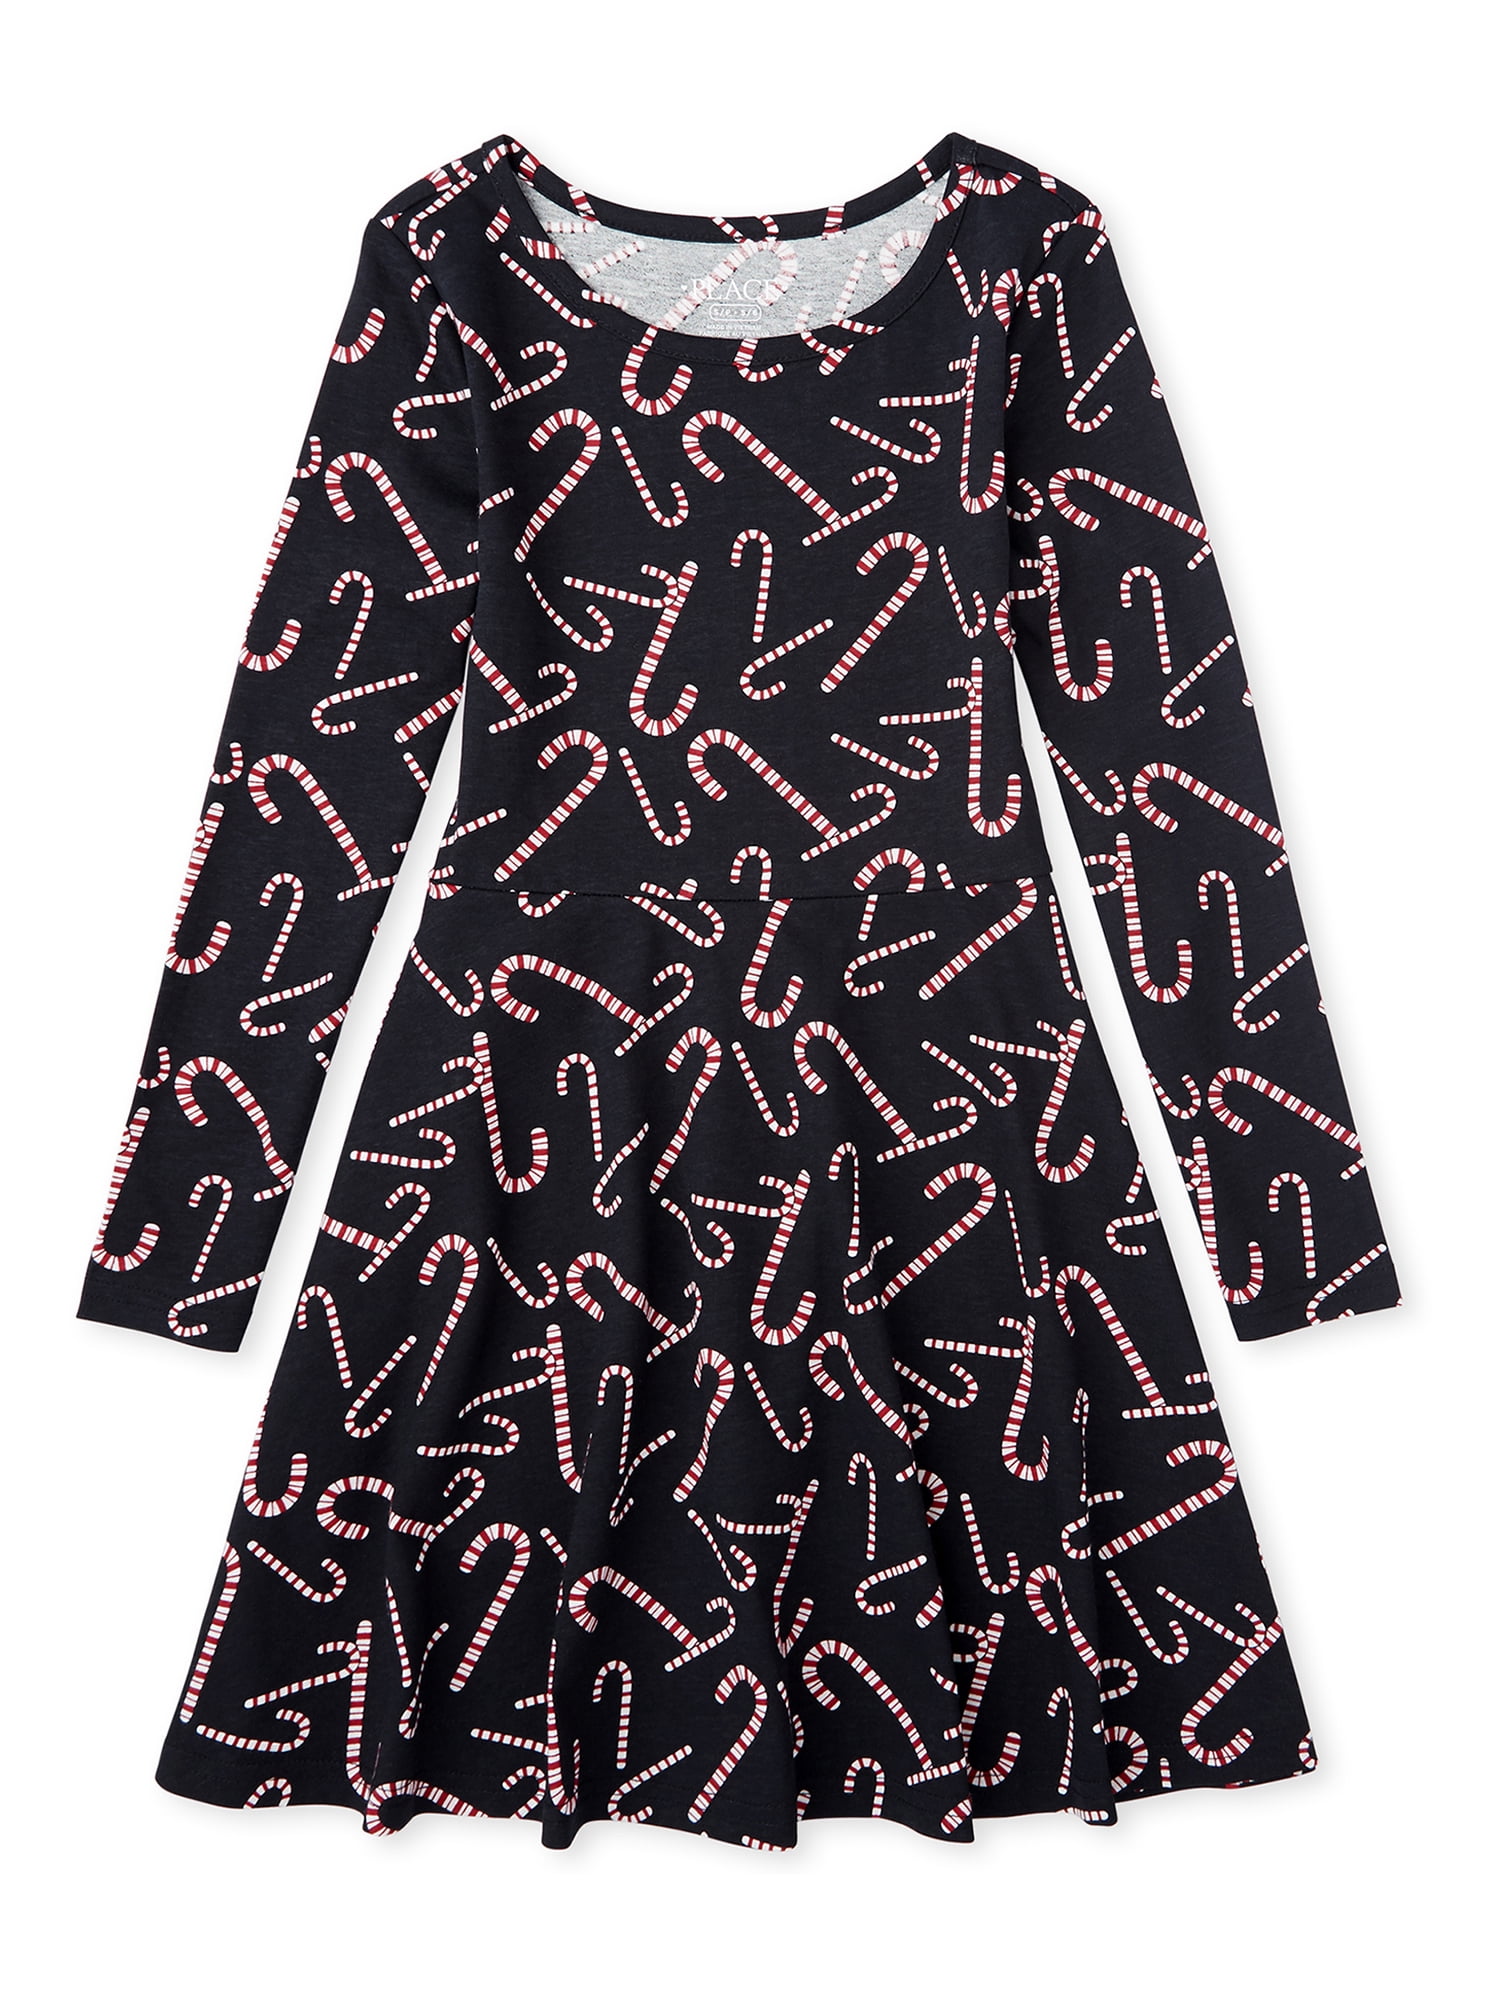 The Children's Place Girls' Print Dress with Long Sleeves, Sizes 5-16 ...